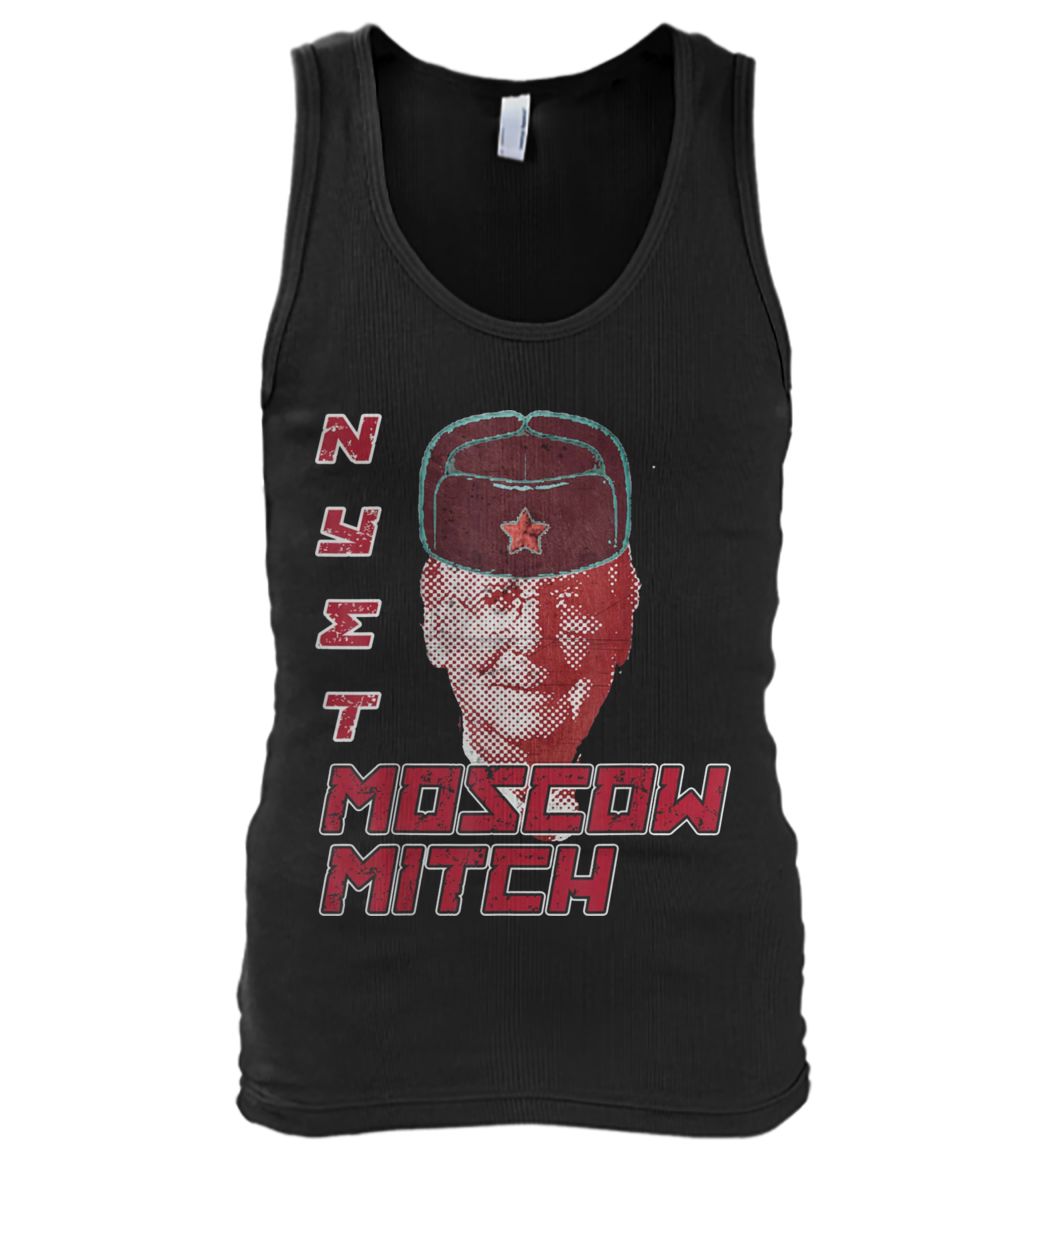 Moscow mitch mcconnell nyet men's tank top